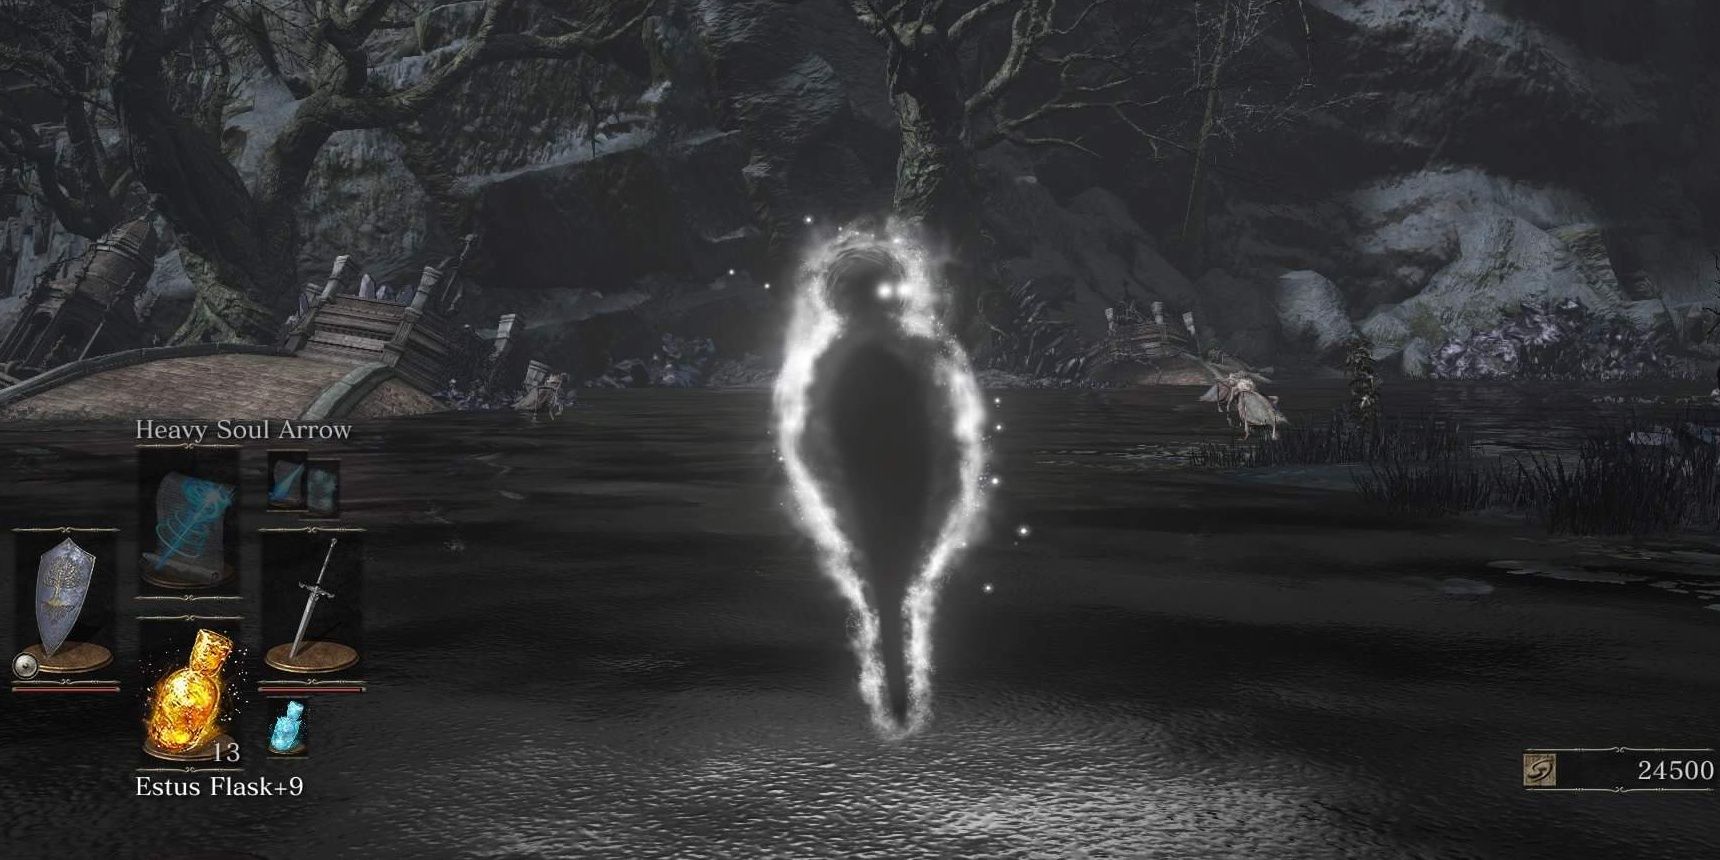 Dark Souls 3 Humanity Sprite From Young White Branch. From USgamer.com